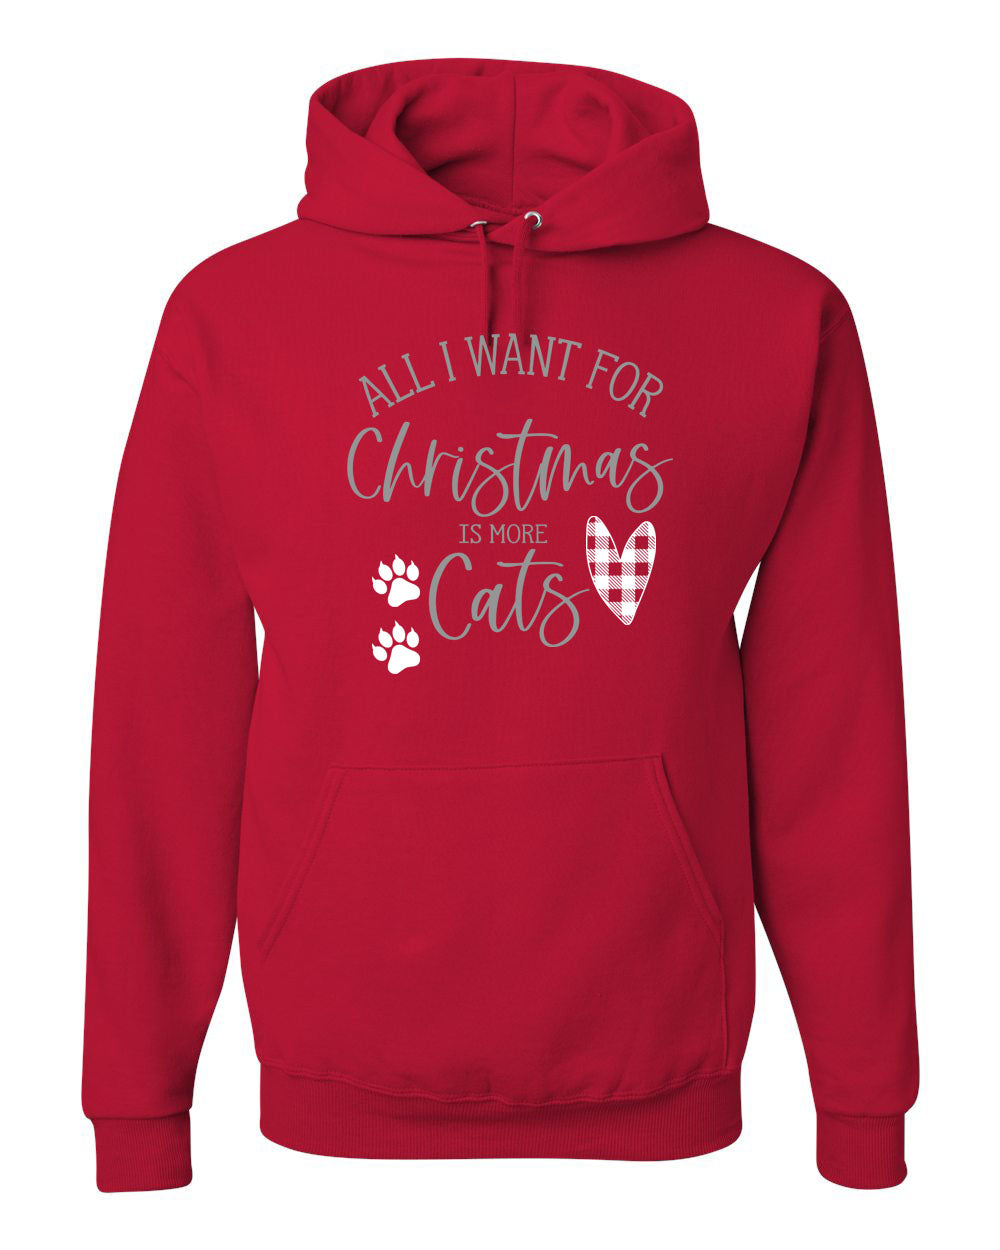 All I want for Christmas is more cats Hooded Sweatshirt